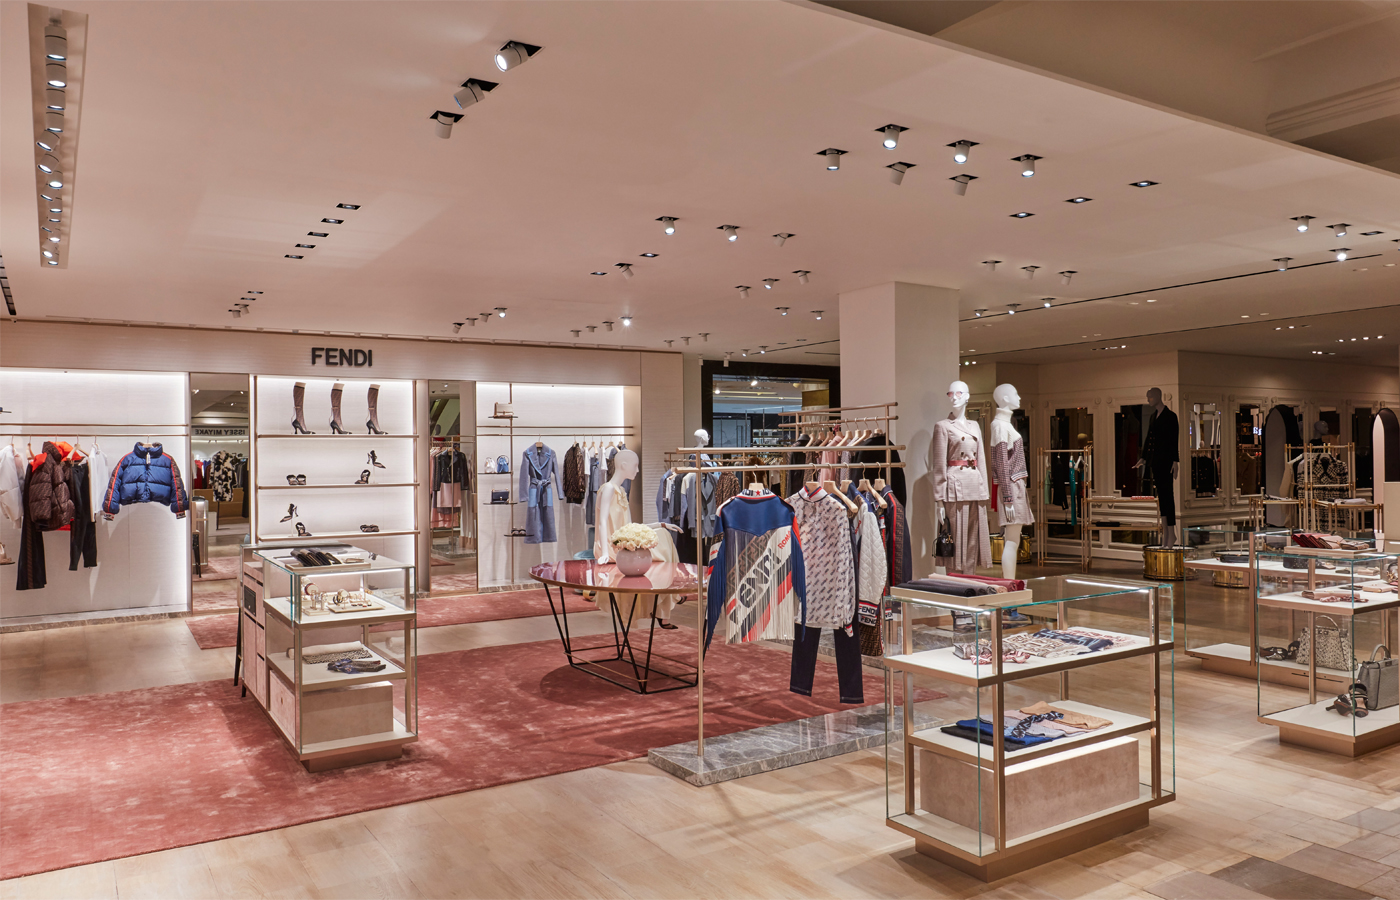 Fendi opens first women’s RTW collection at Selfridges - The Glass Magazine